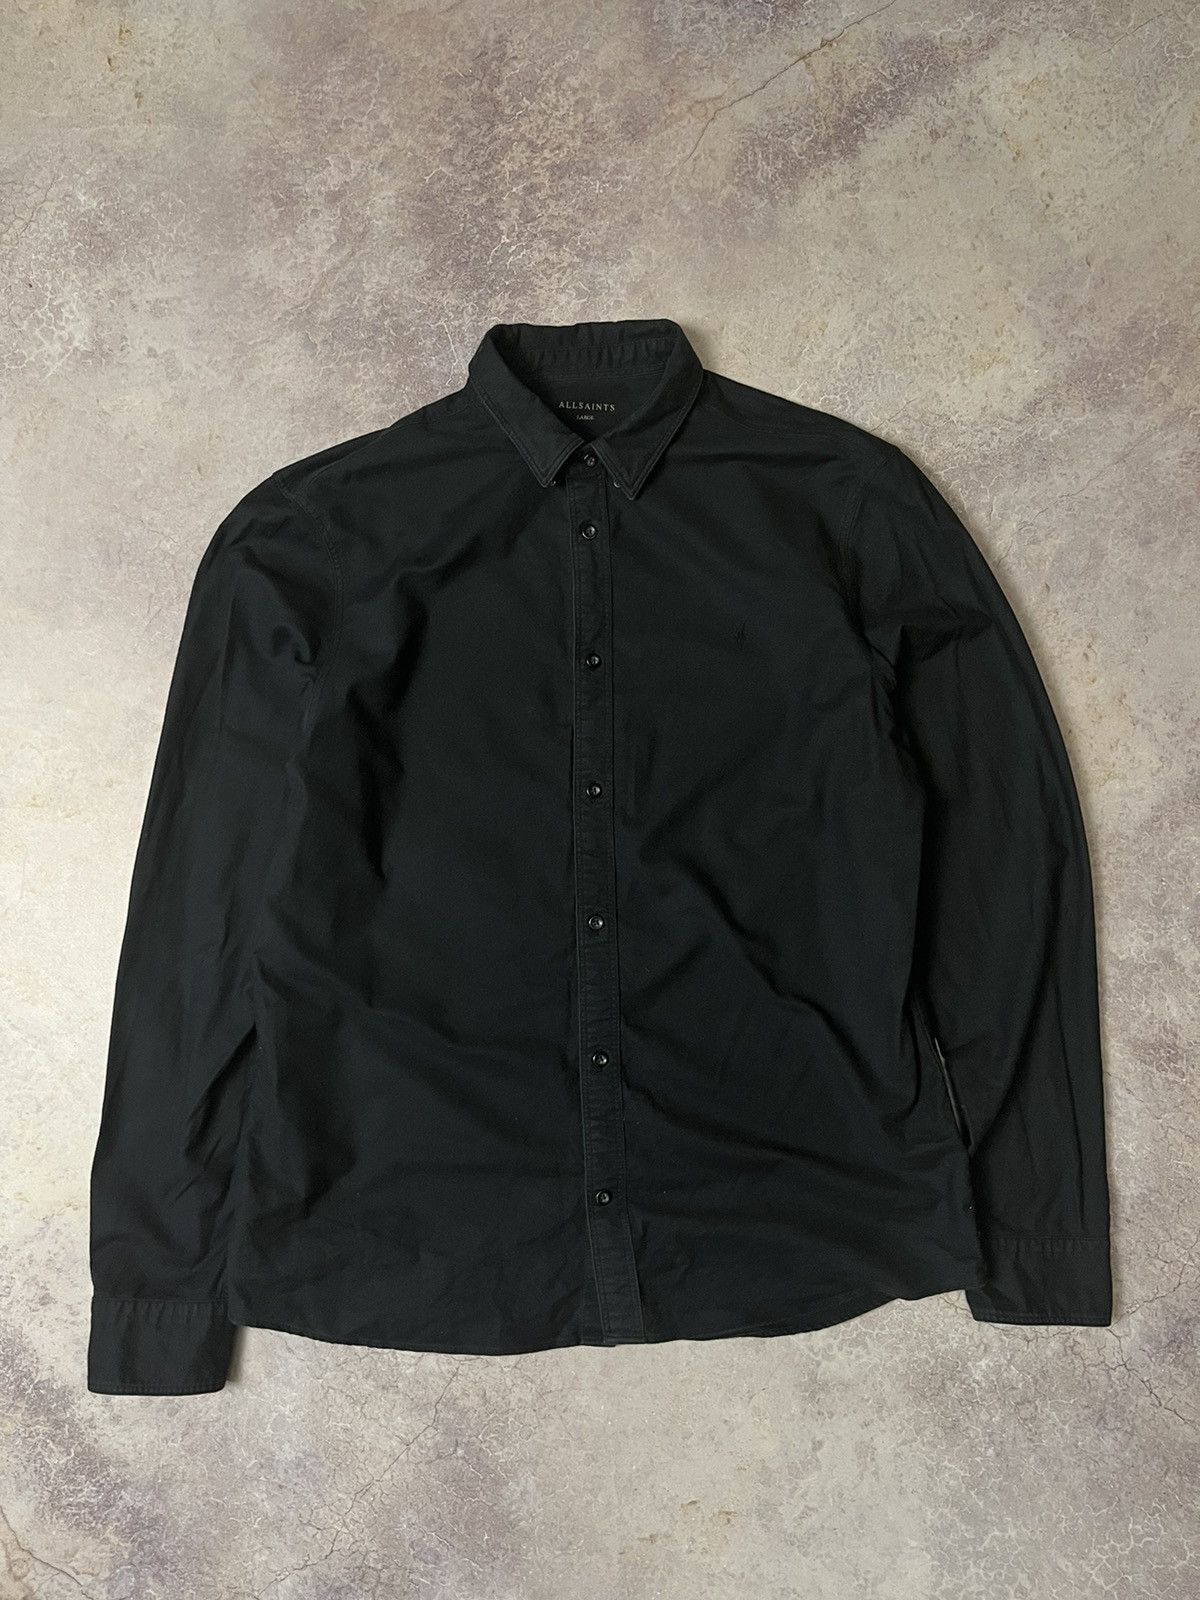 Pre-owned Allsaints Luxury  Overshirt Shirt 90's In Black